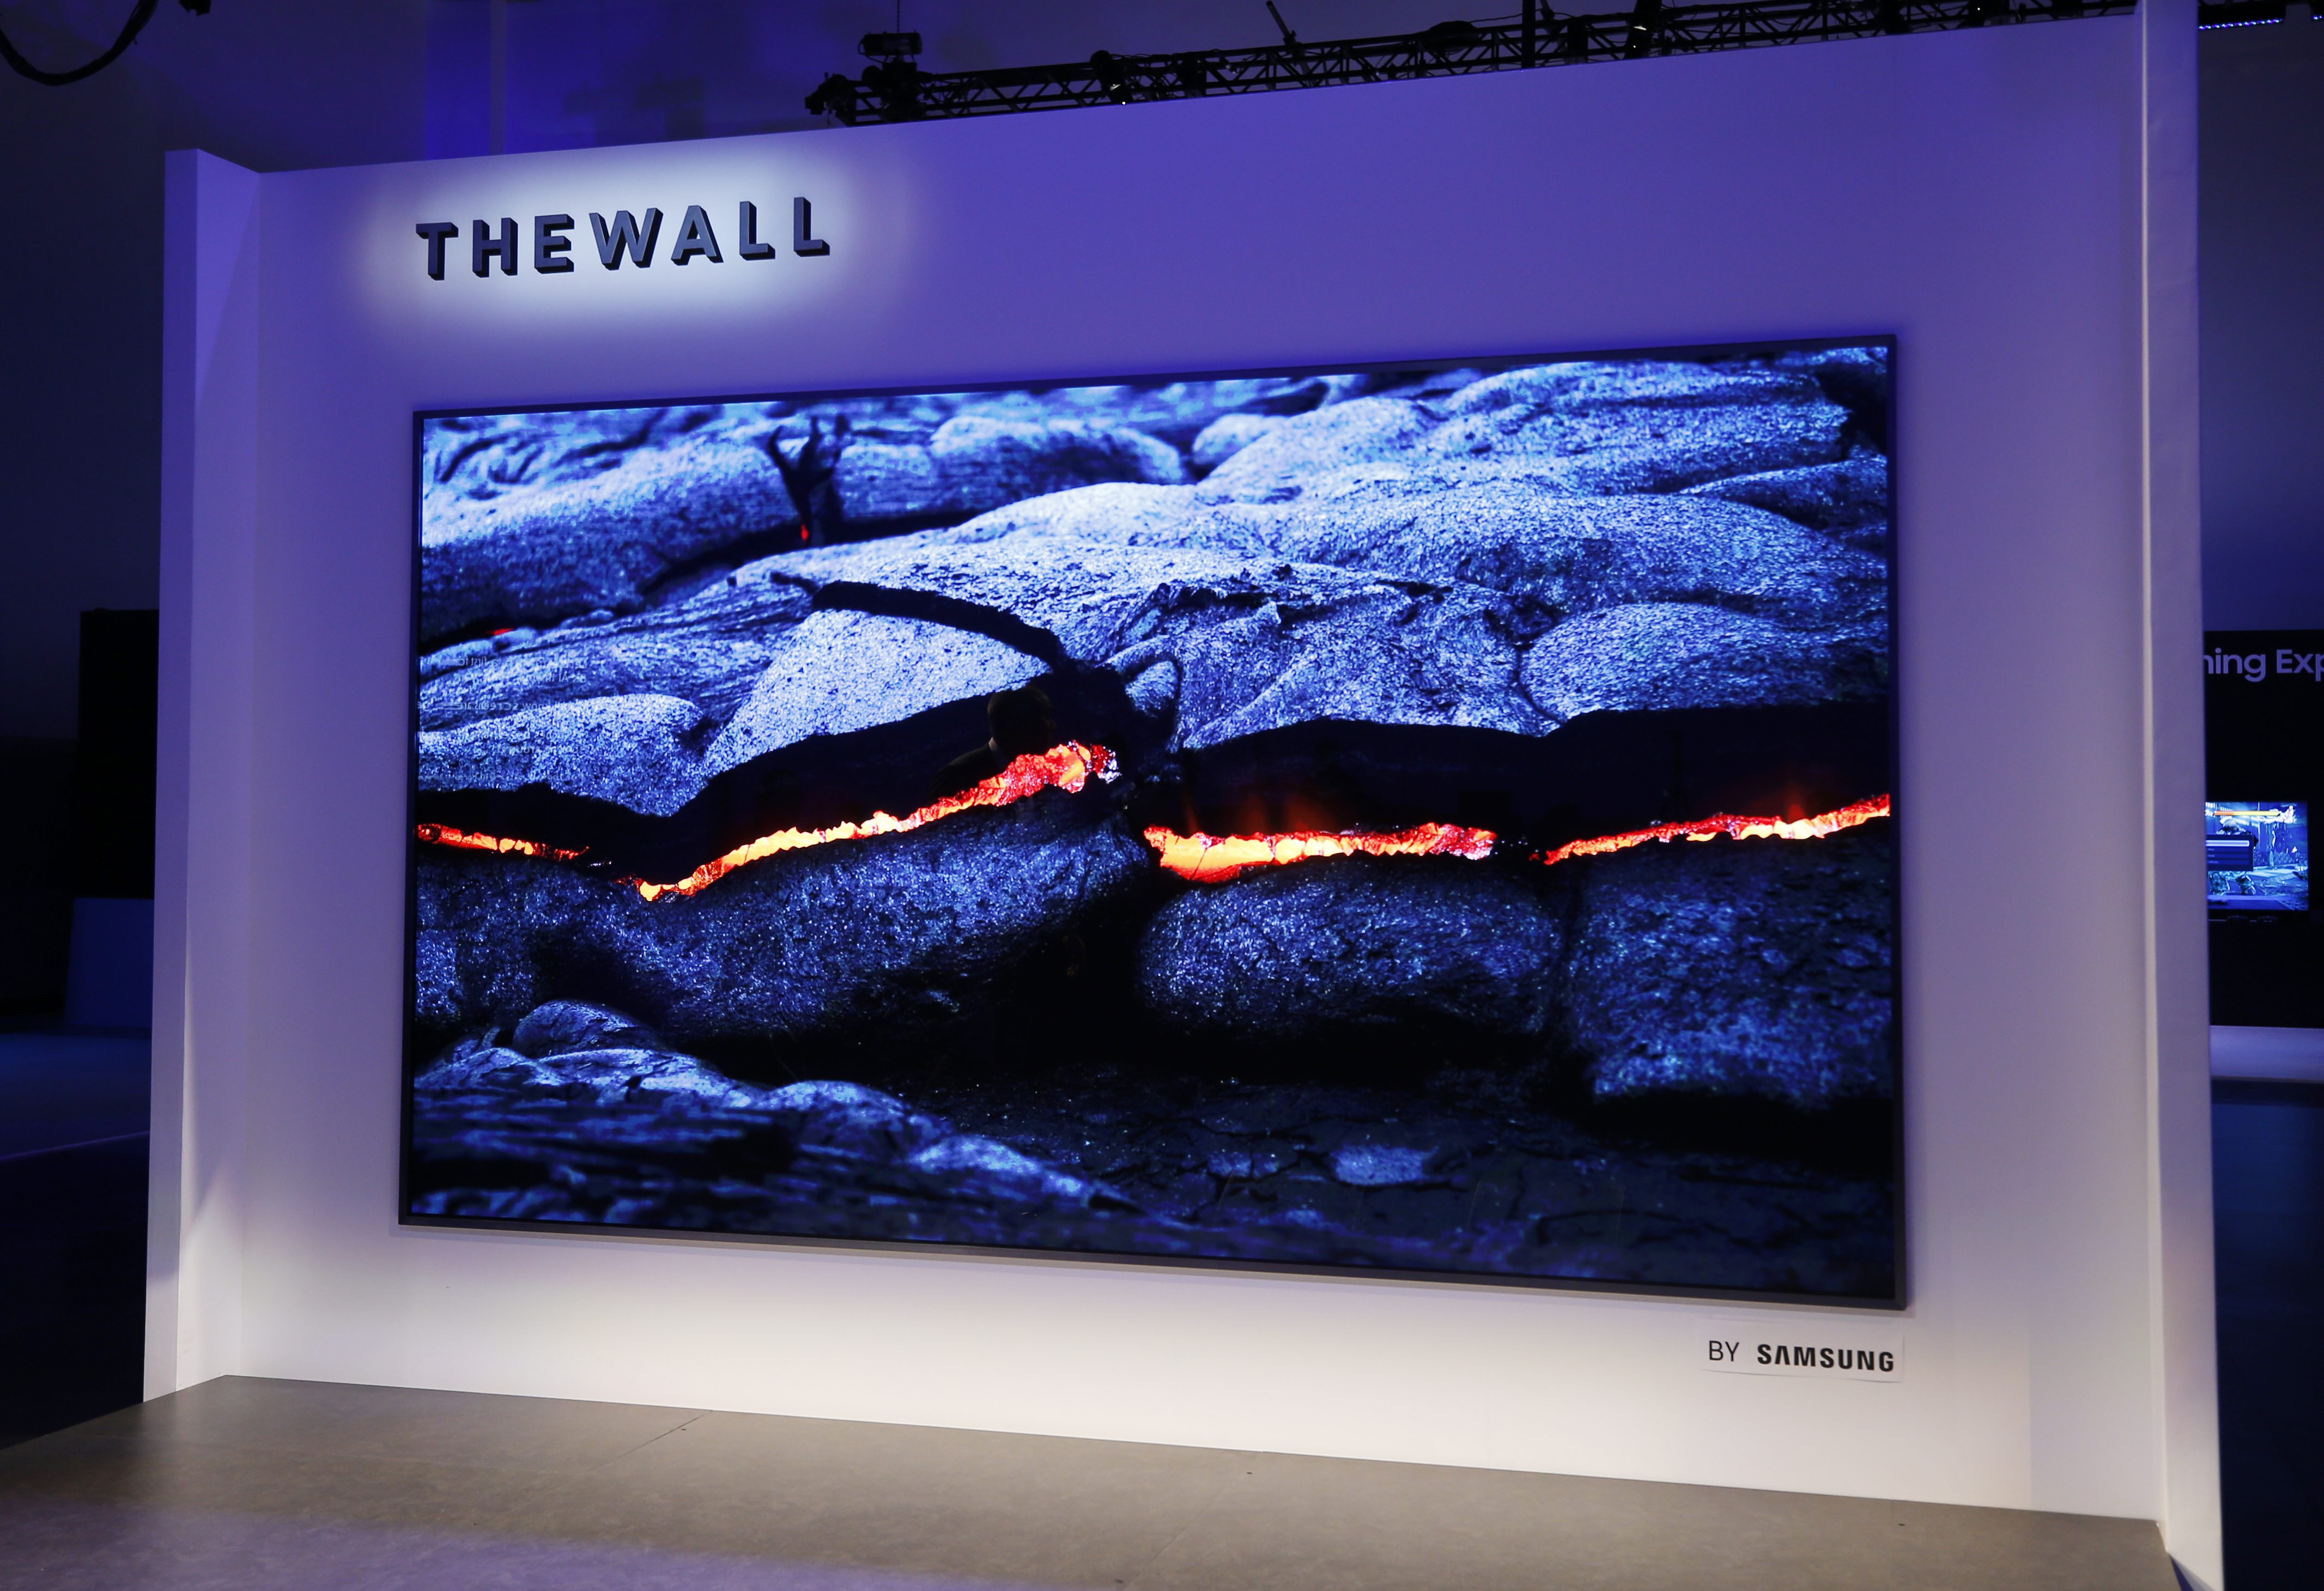 New Samsung TV is Literally a Wall